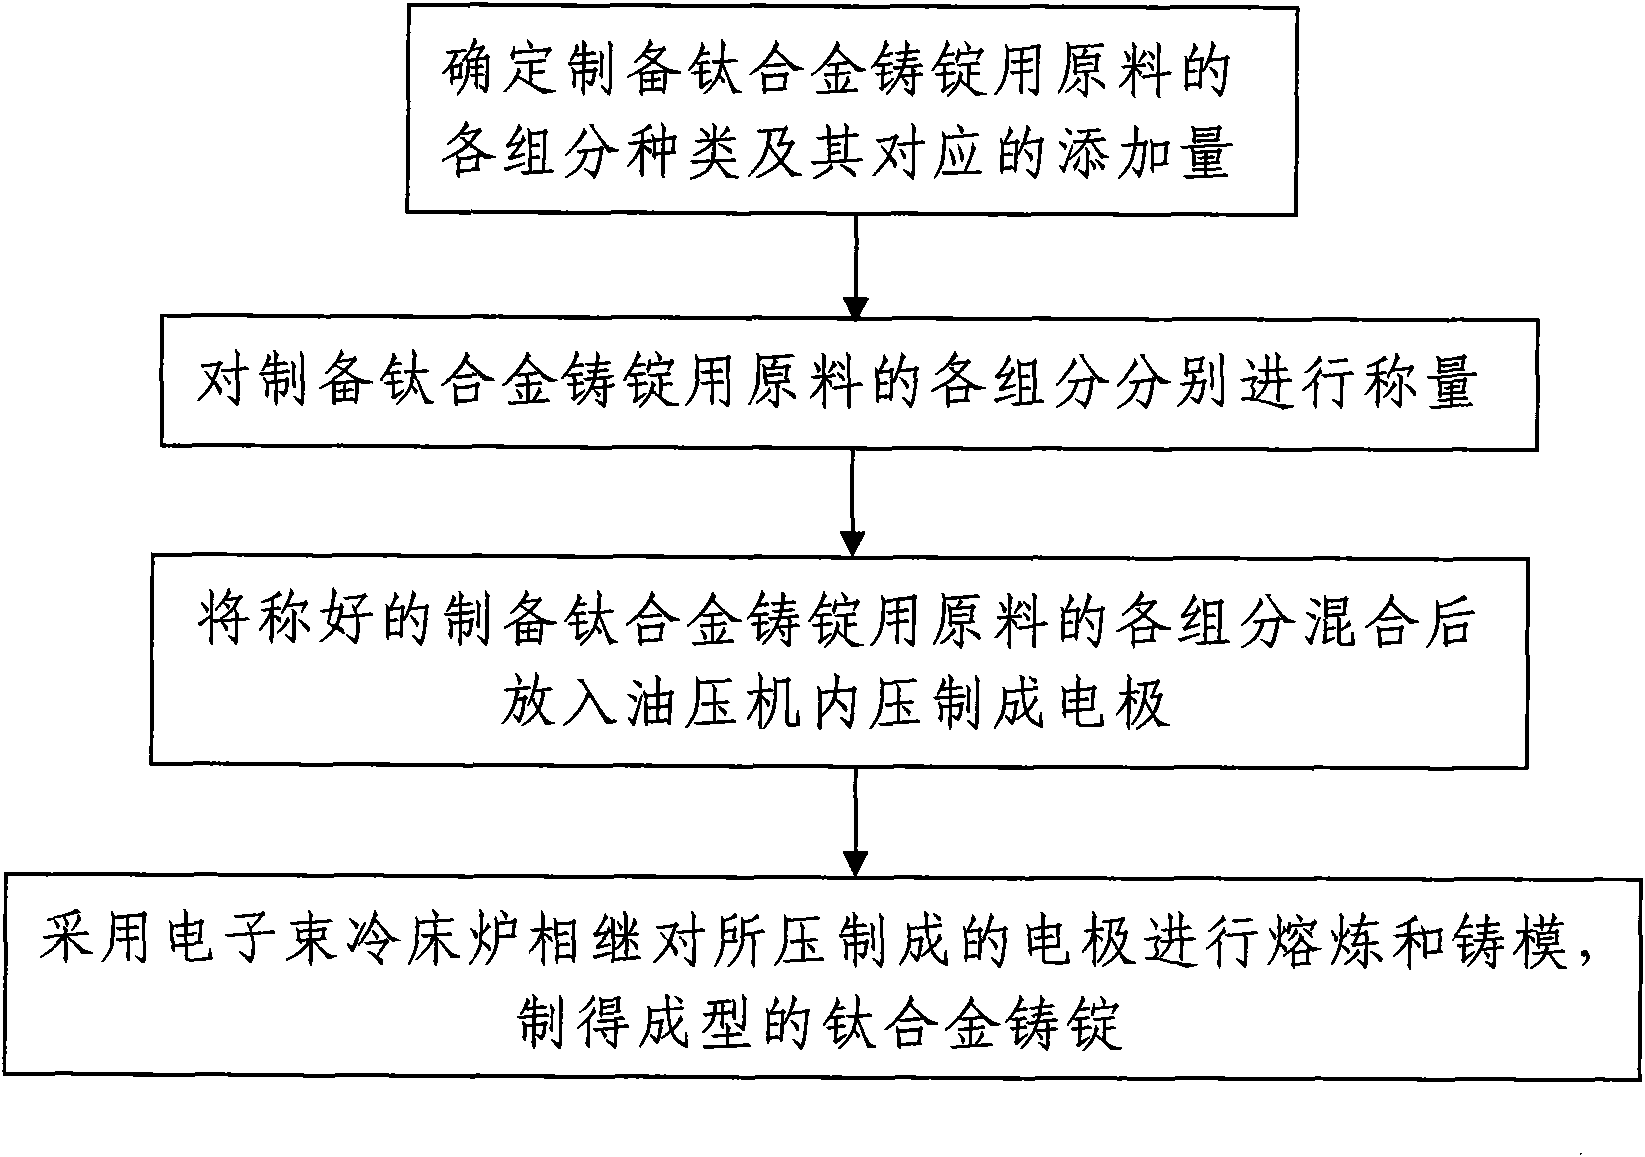 Method for preparing titanium alloy ingots through electron-beam cold bed furnaces by adopting conventional raw materials